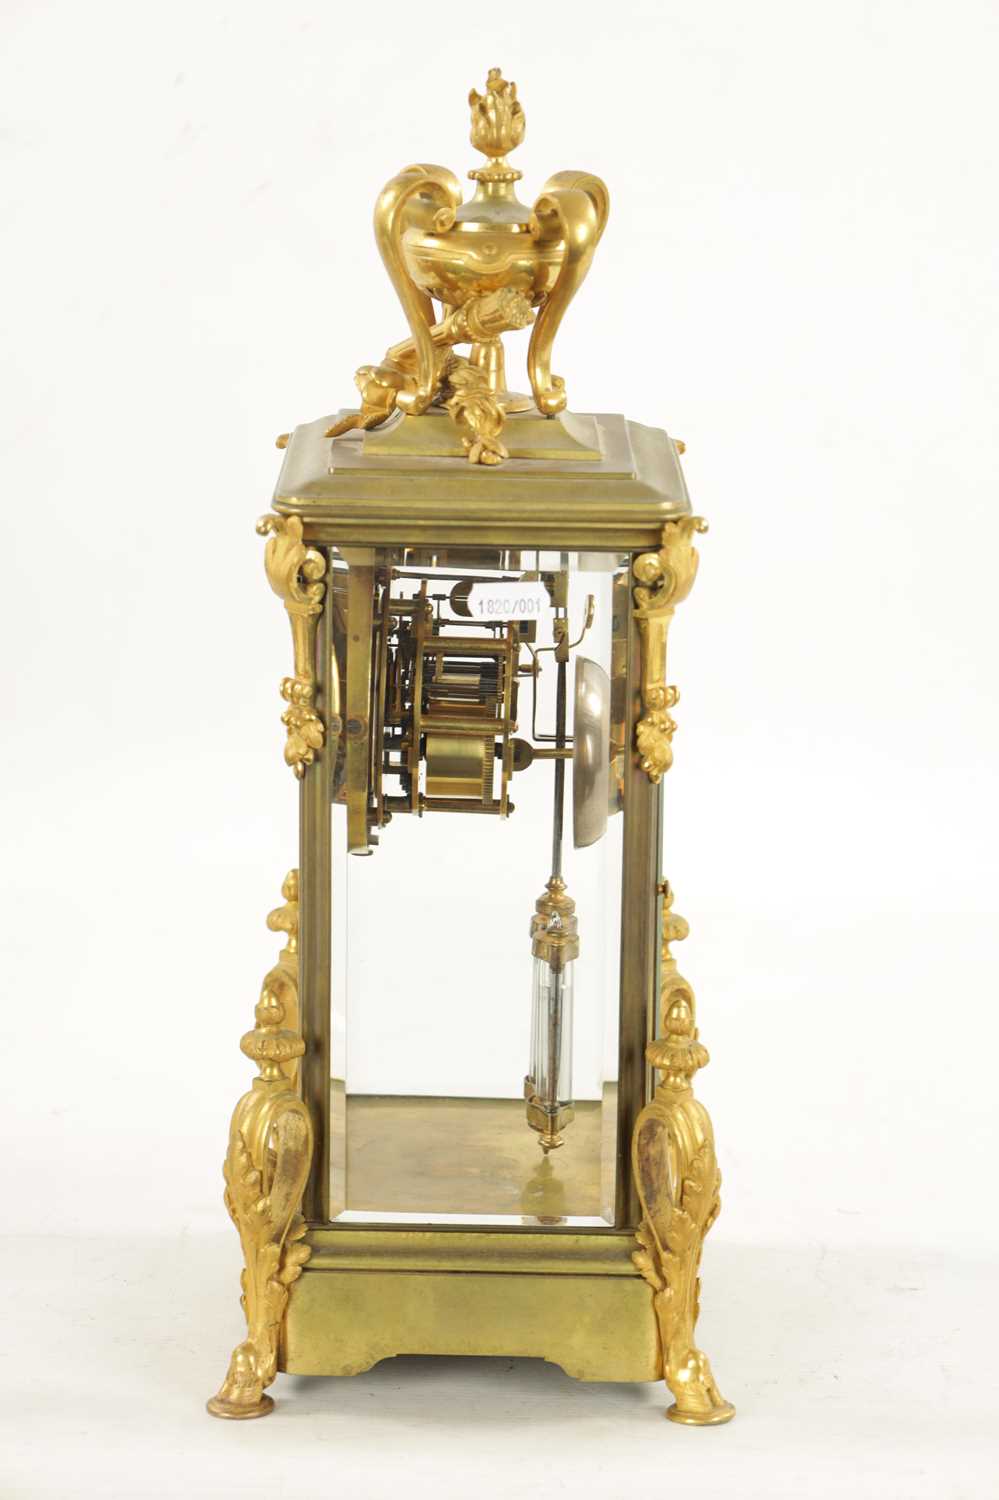 A LATE 19TH CENTURY FRENCH GILT BRASS FOUR-GLASS MANTEL CLOCK - Image 5 of 10